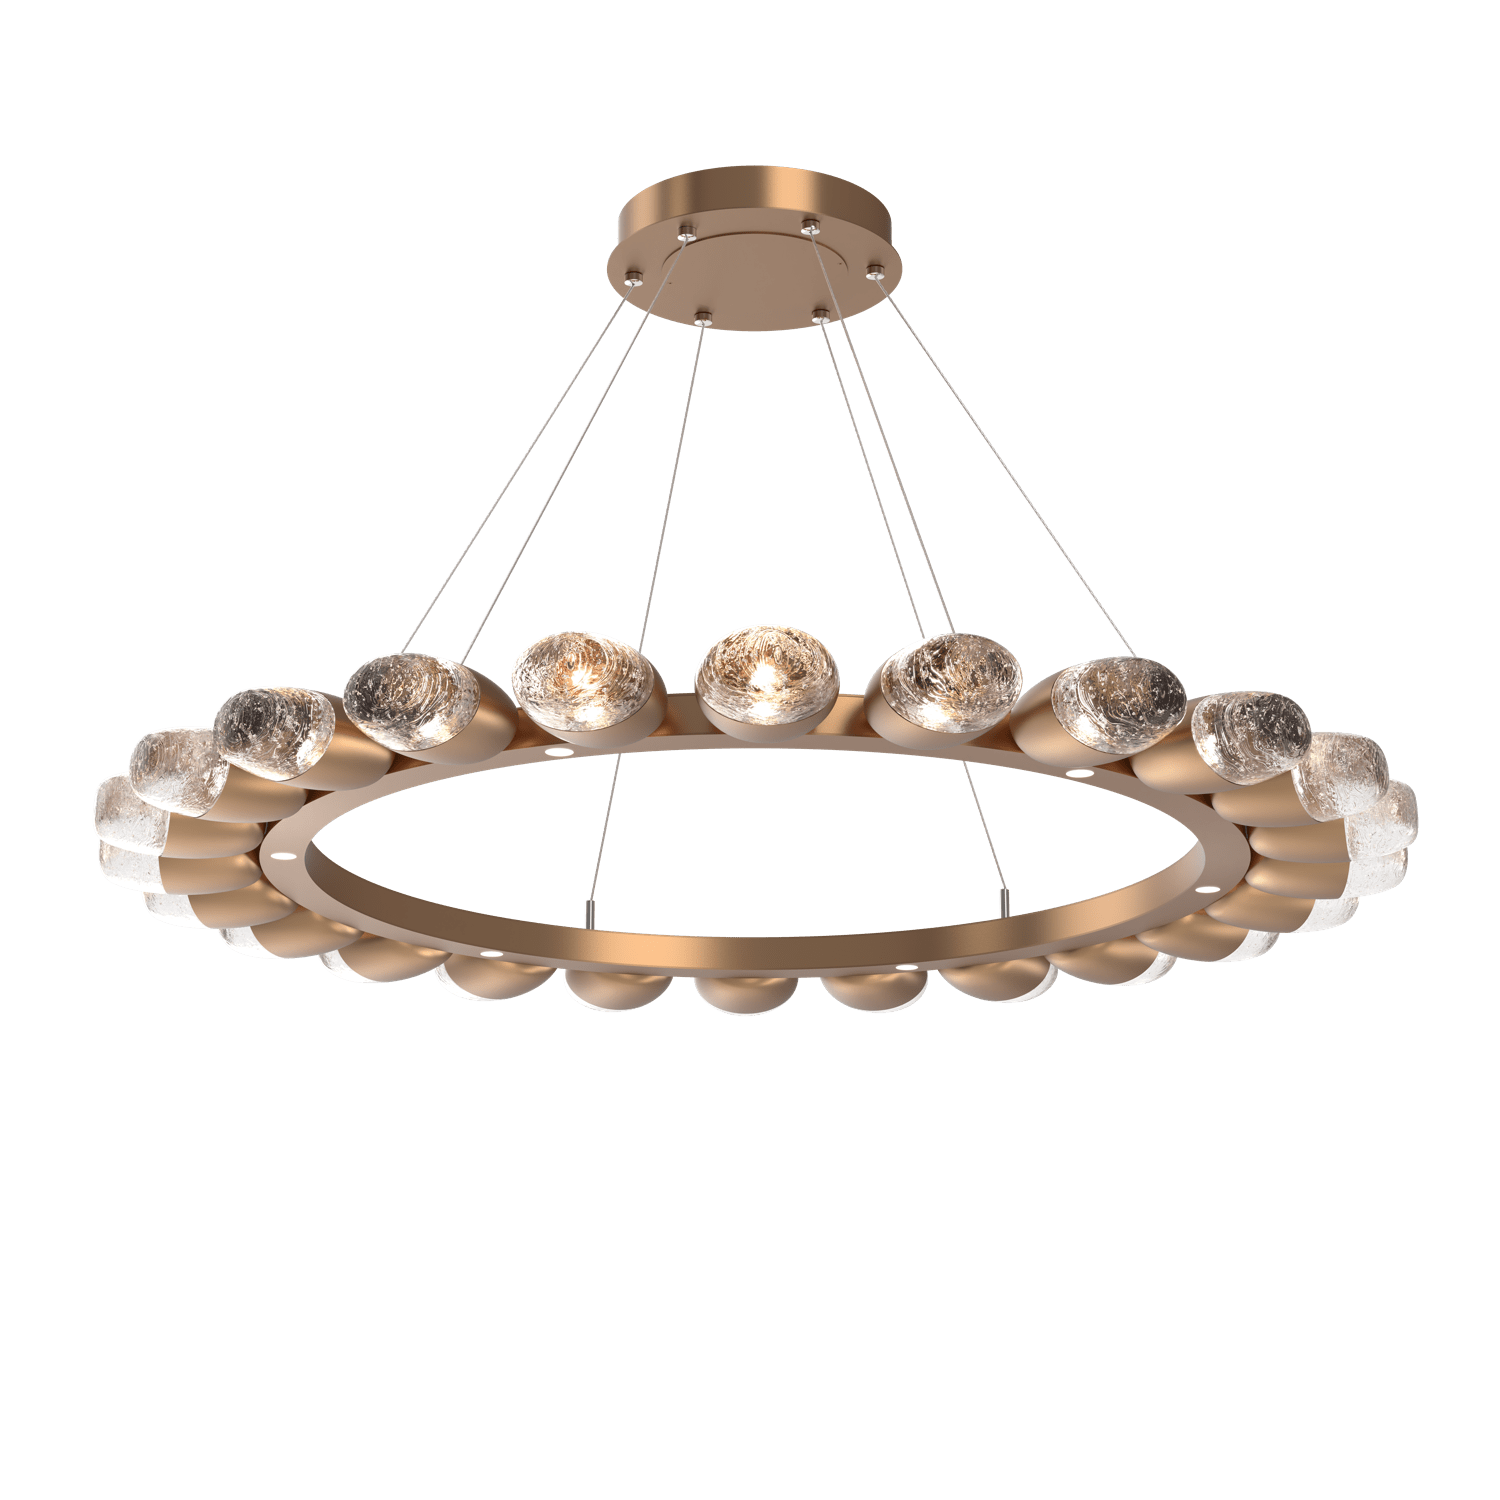 CHB0079-48-NB-Hammerton-Studio-Pebble-48-inch-radial-ring-chandelier-with-novel-brass-finish-and-clear-cast-glass-shades-and-LED-lamping